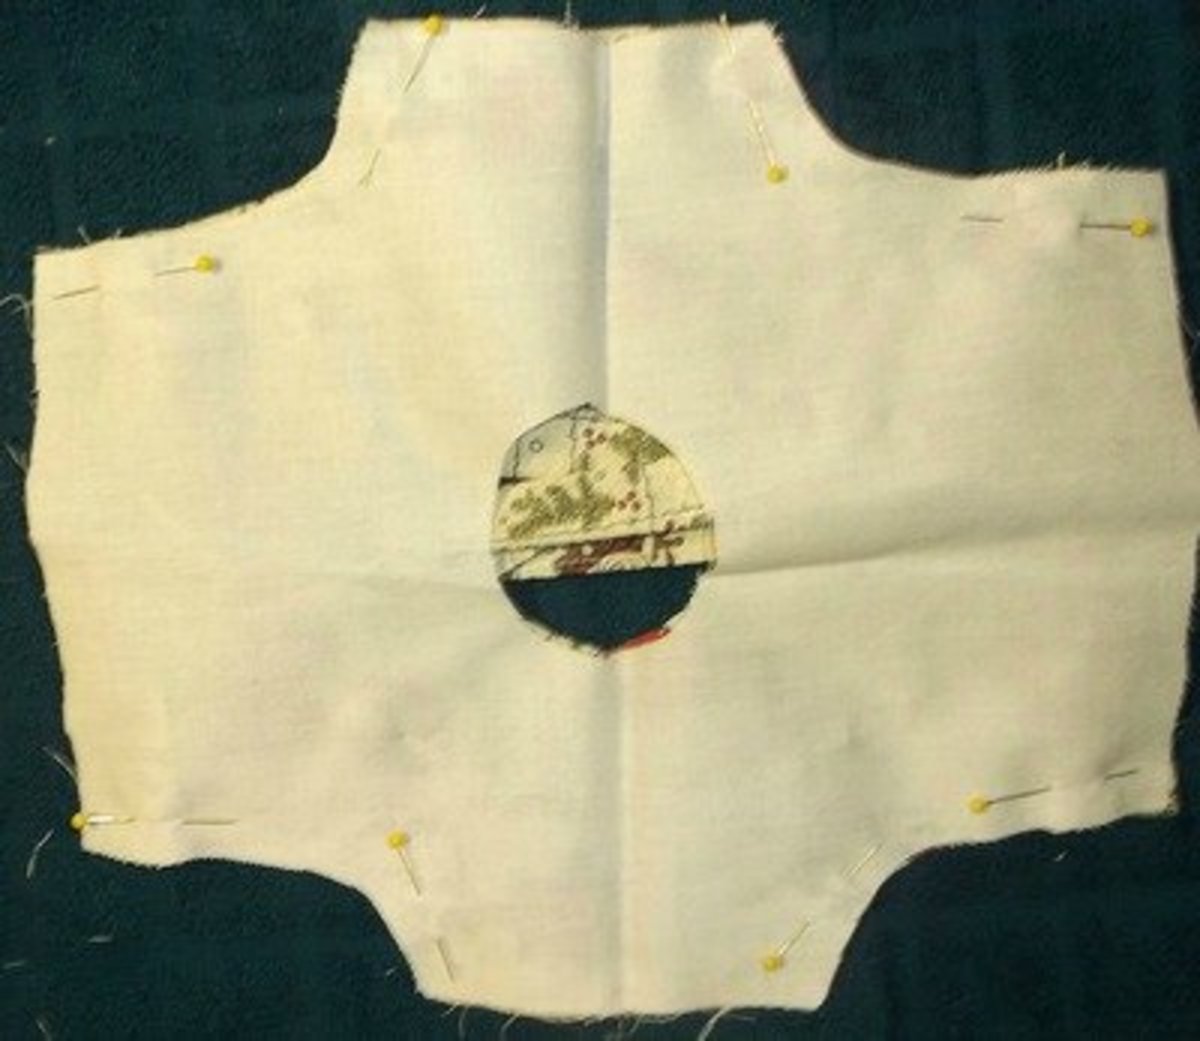 Sew the lining into the sides of the bodice, being careful when you sew the ties.